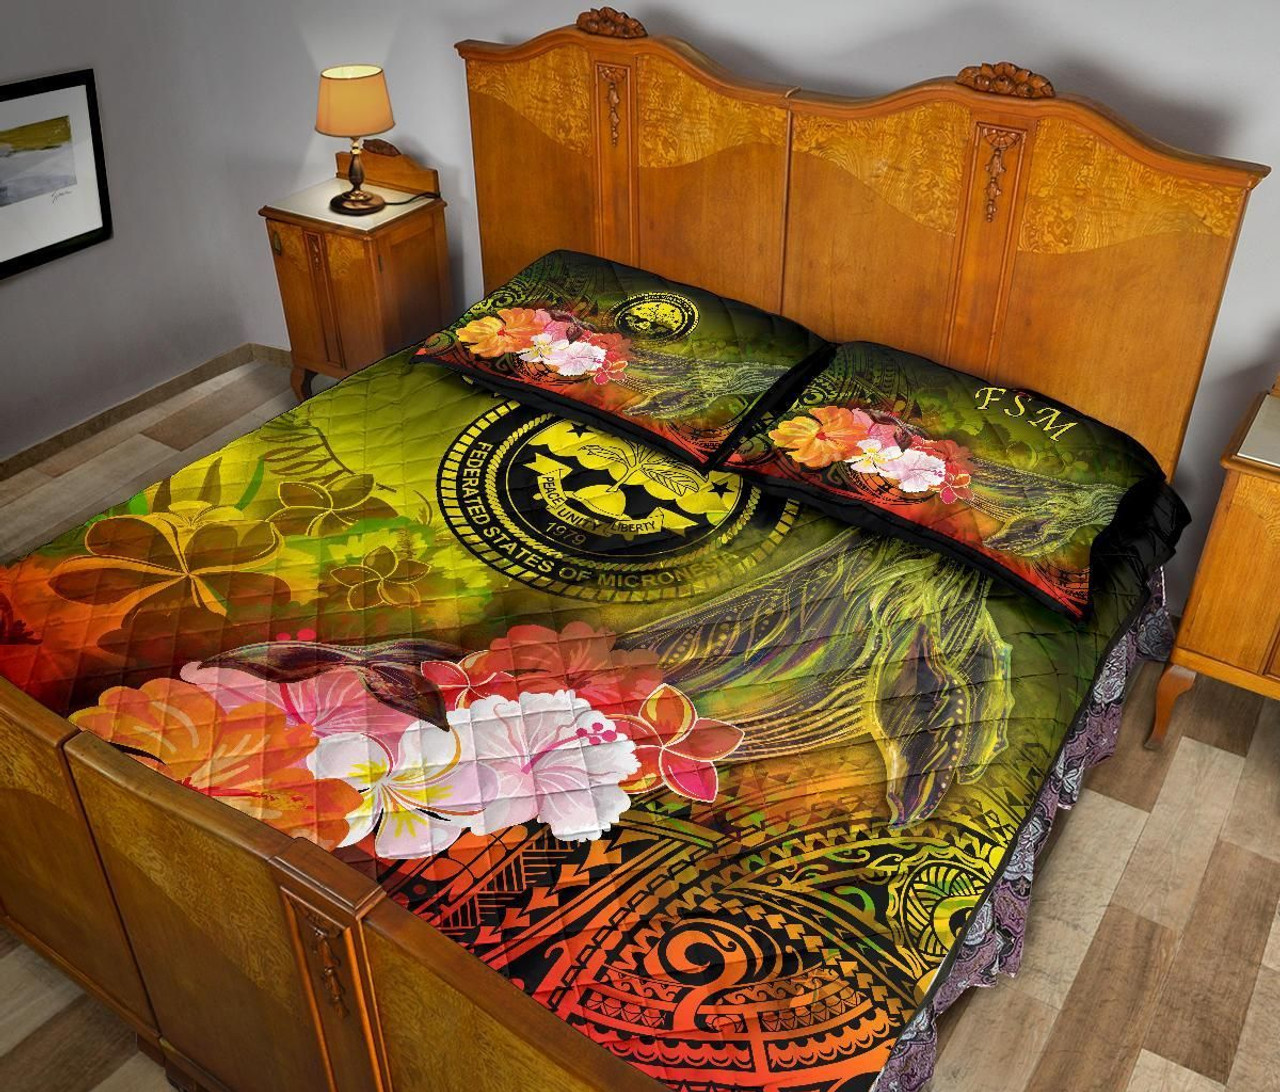 Federated States of Micronesia Quilt Bed Set - Humpback Whale with Tropical Flowers (Yellow) 4